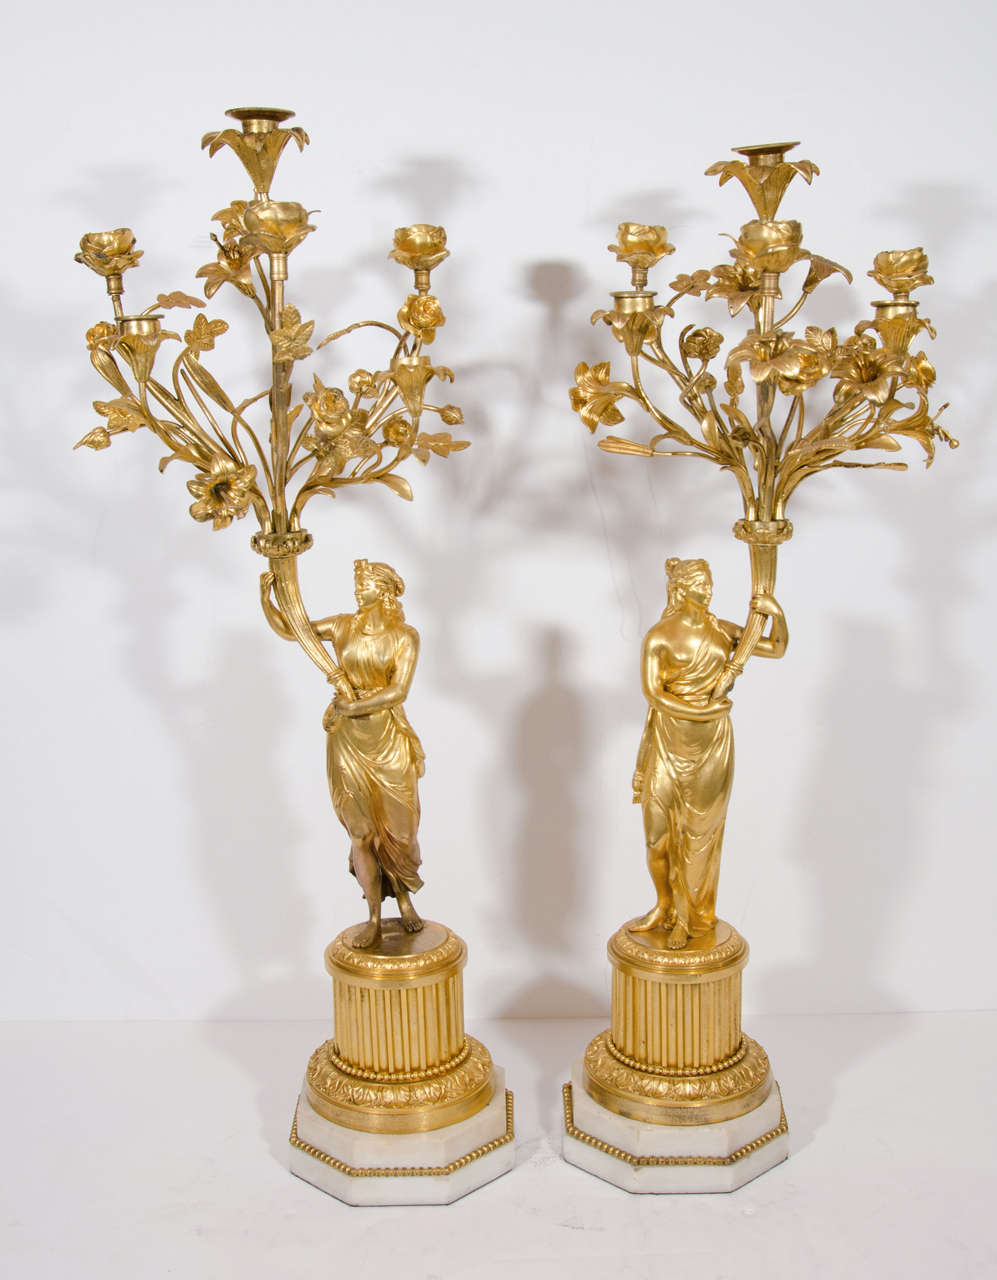 A pair of Large Antique French Louis XVI Style gilt bronze figural multi arm candelabras of exquisite detail. These unique candelabras are embellished with gilt bronze figures of neoclassical ladies and further adorned with branches and flowers